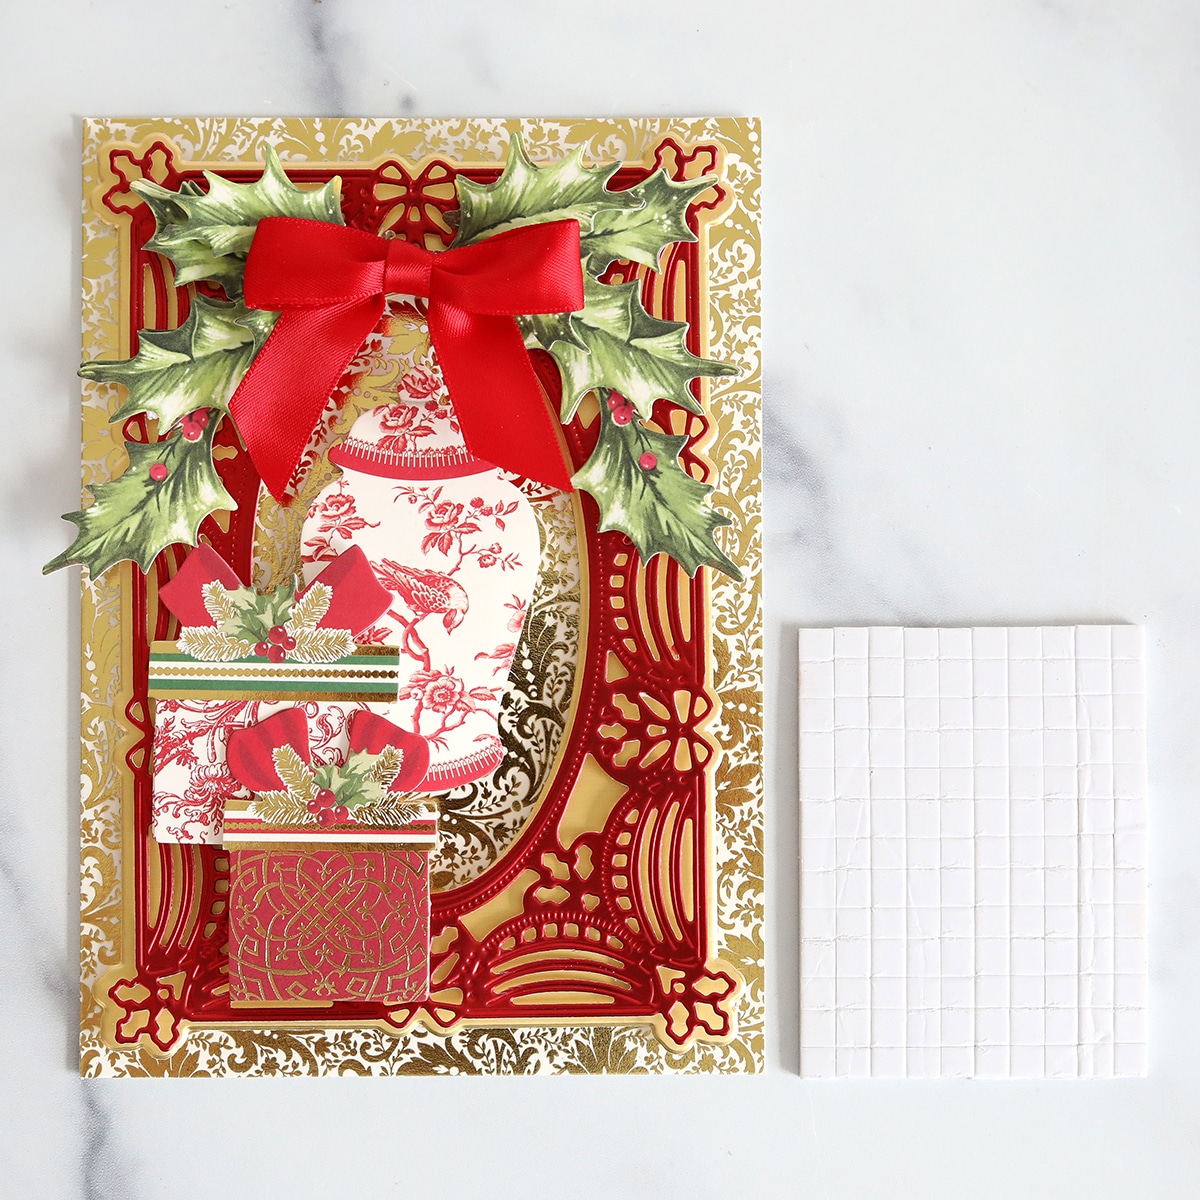 A christmas card with holly and bows on it.